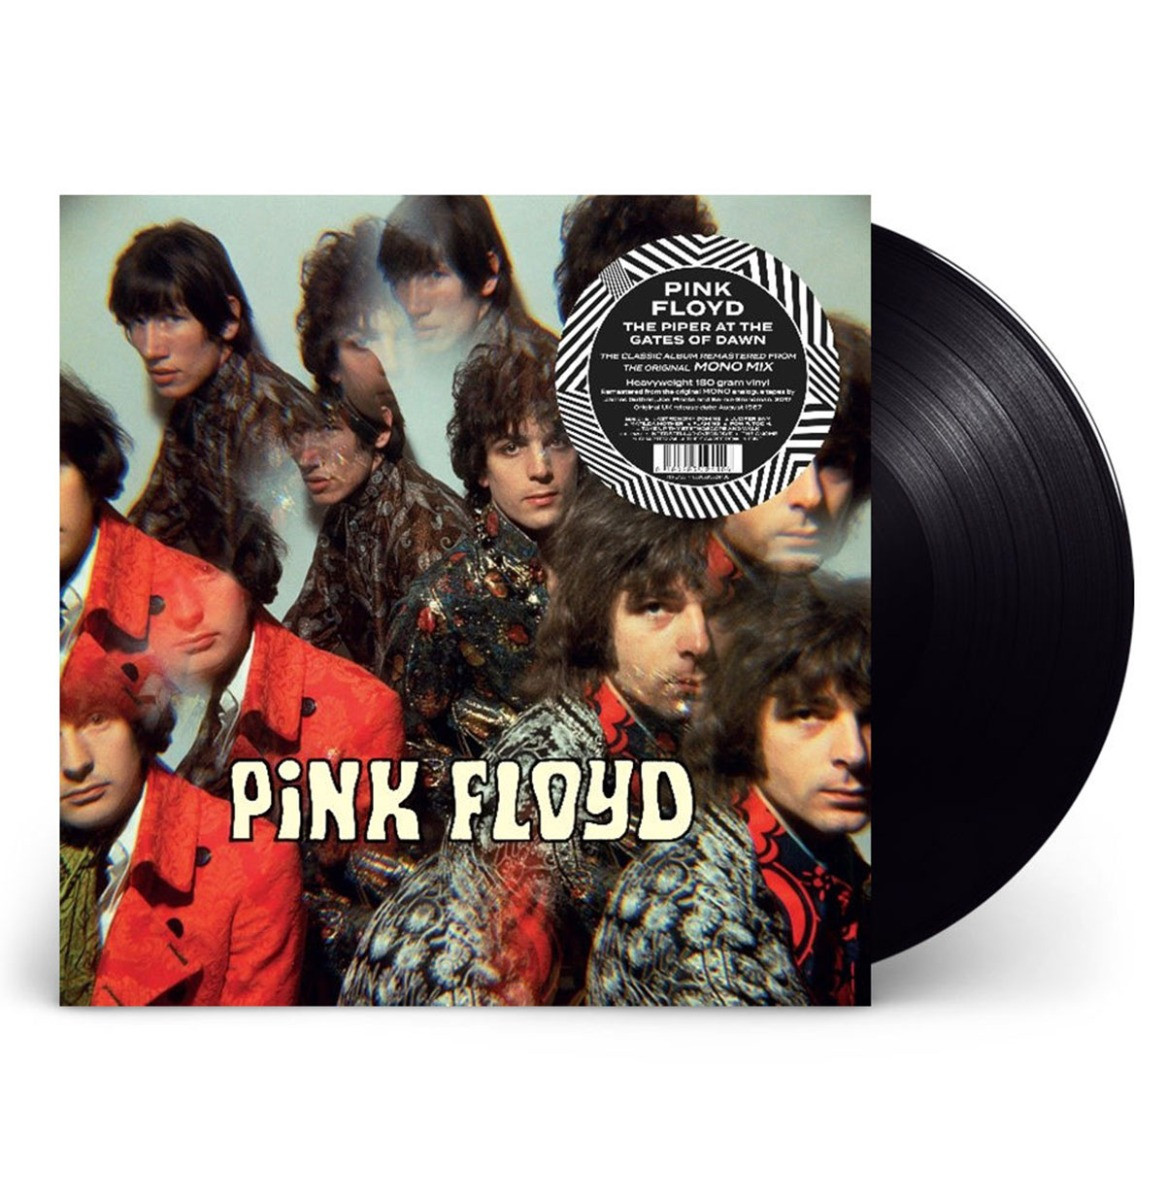 Pink Floyd - The Piper At The Gates Of Dawn (Mono Mix) LP